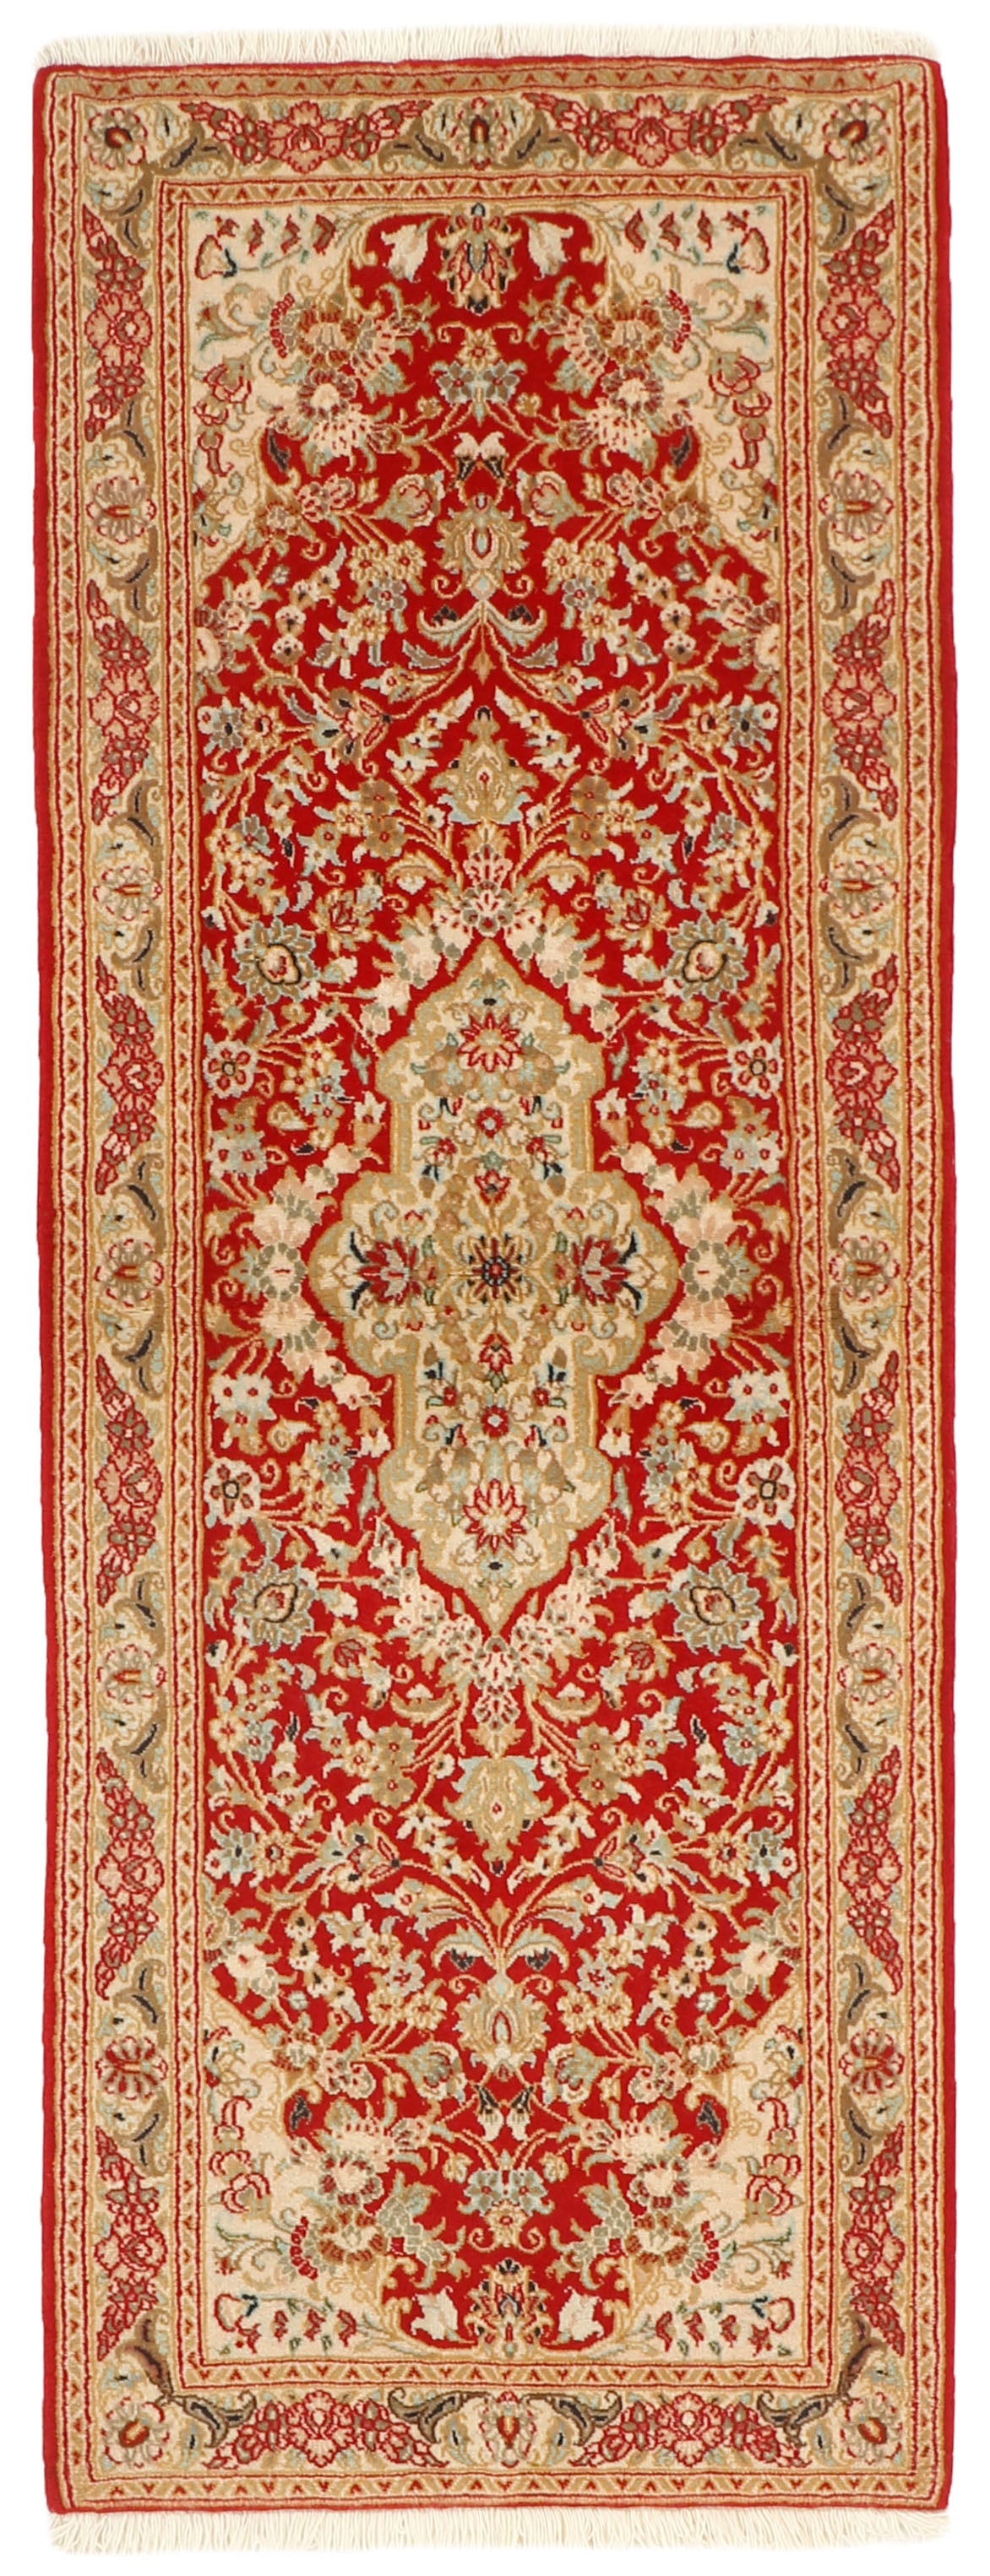 Authentic persian runner with a traditional floral design in red and beige